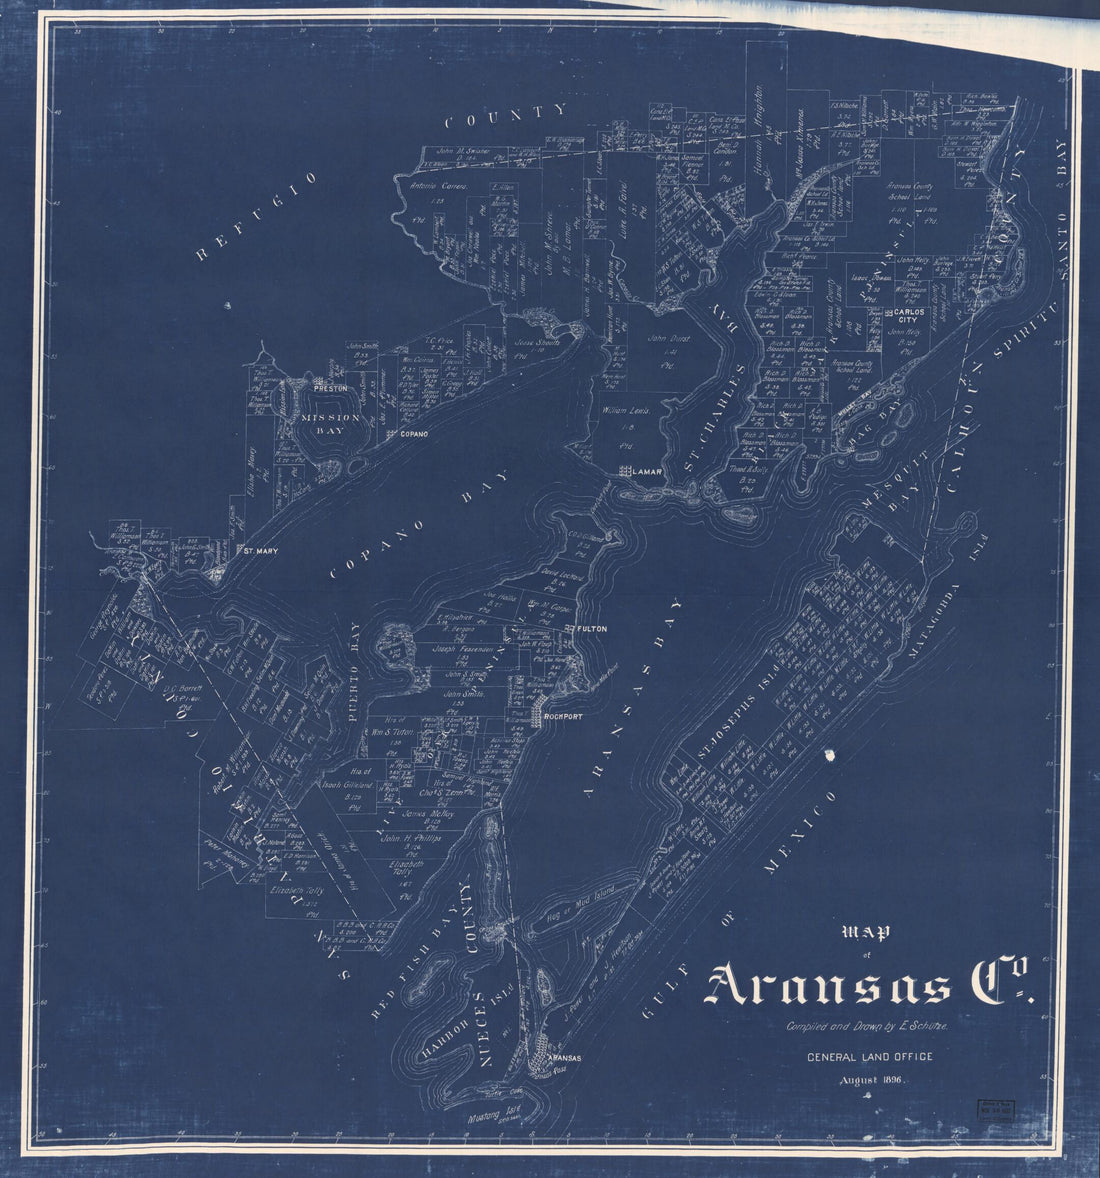 This old map of Map of Aransas Co. (Map of Aransas County, Texas) from 1896 was created by E. Schütze,  Texas. General Land Office in 1896